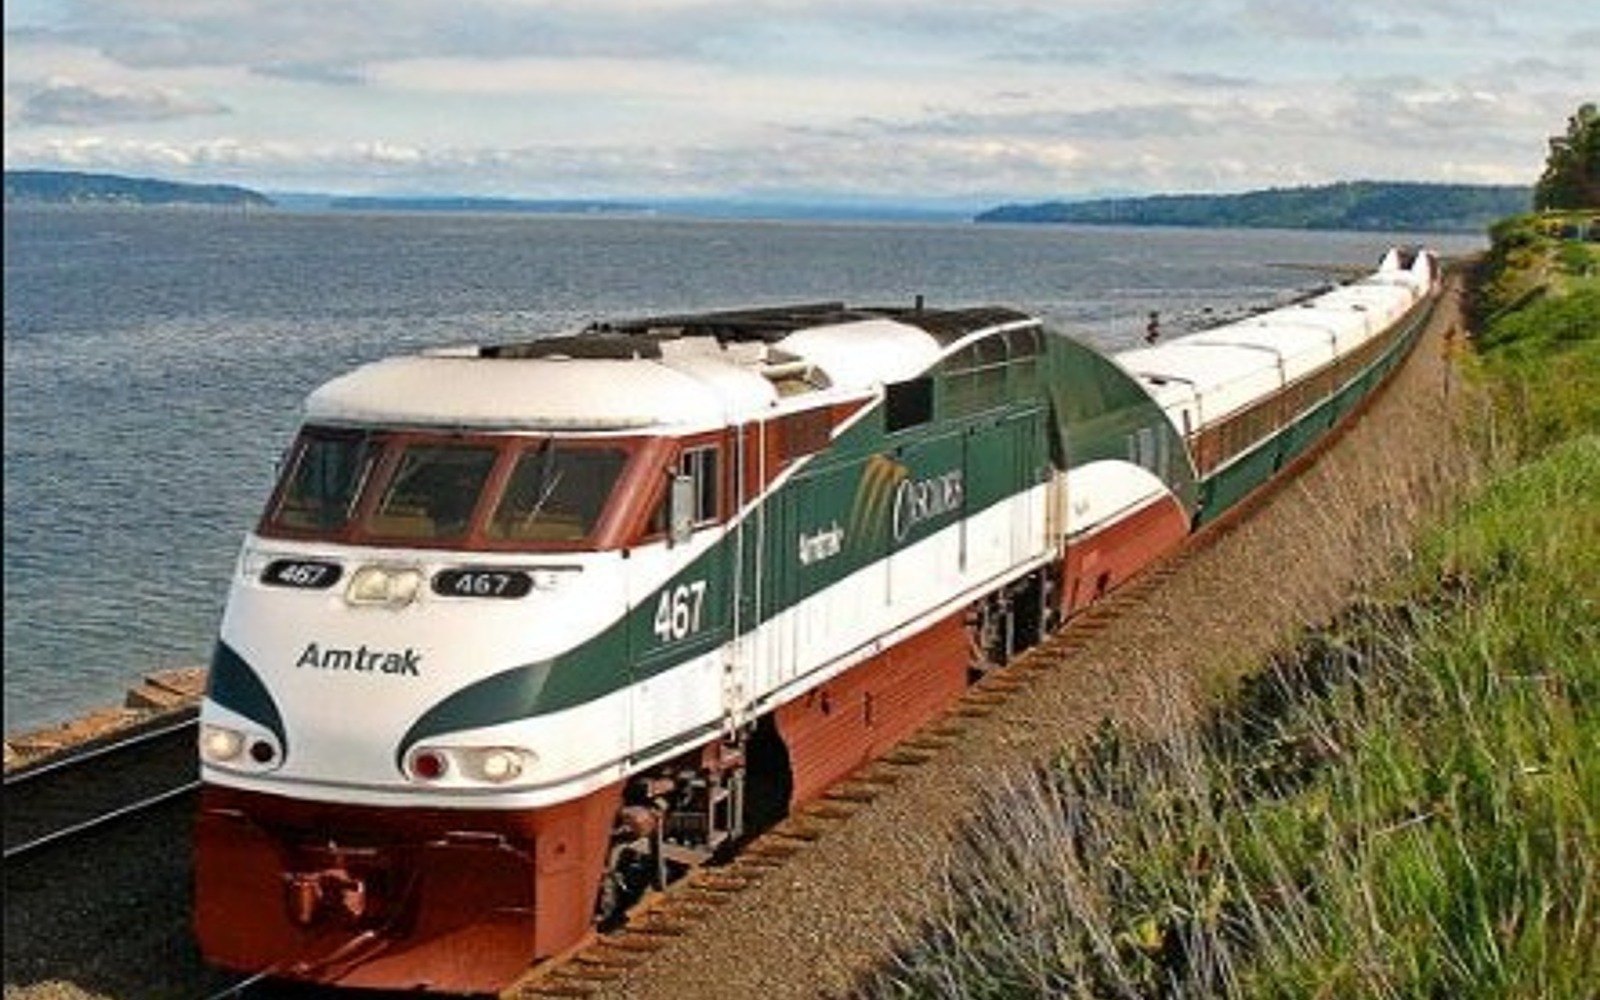 the vancouver to seattle train running along the pacific coast